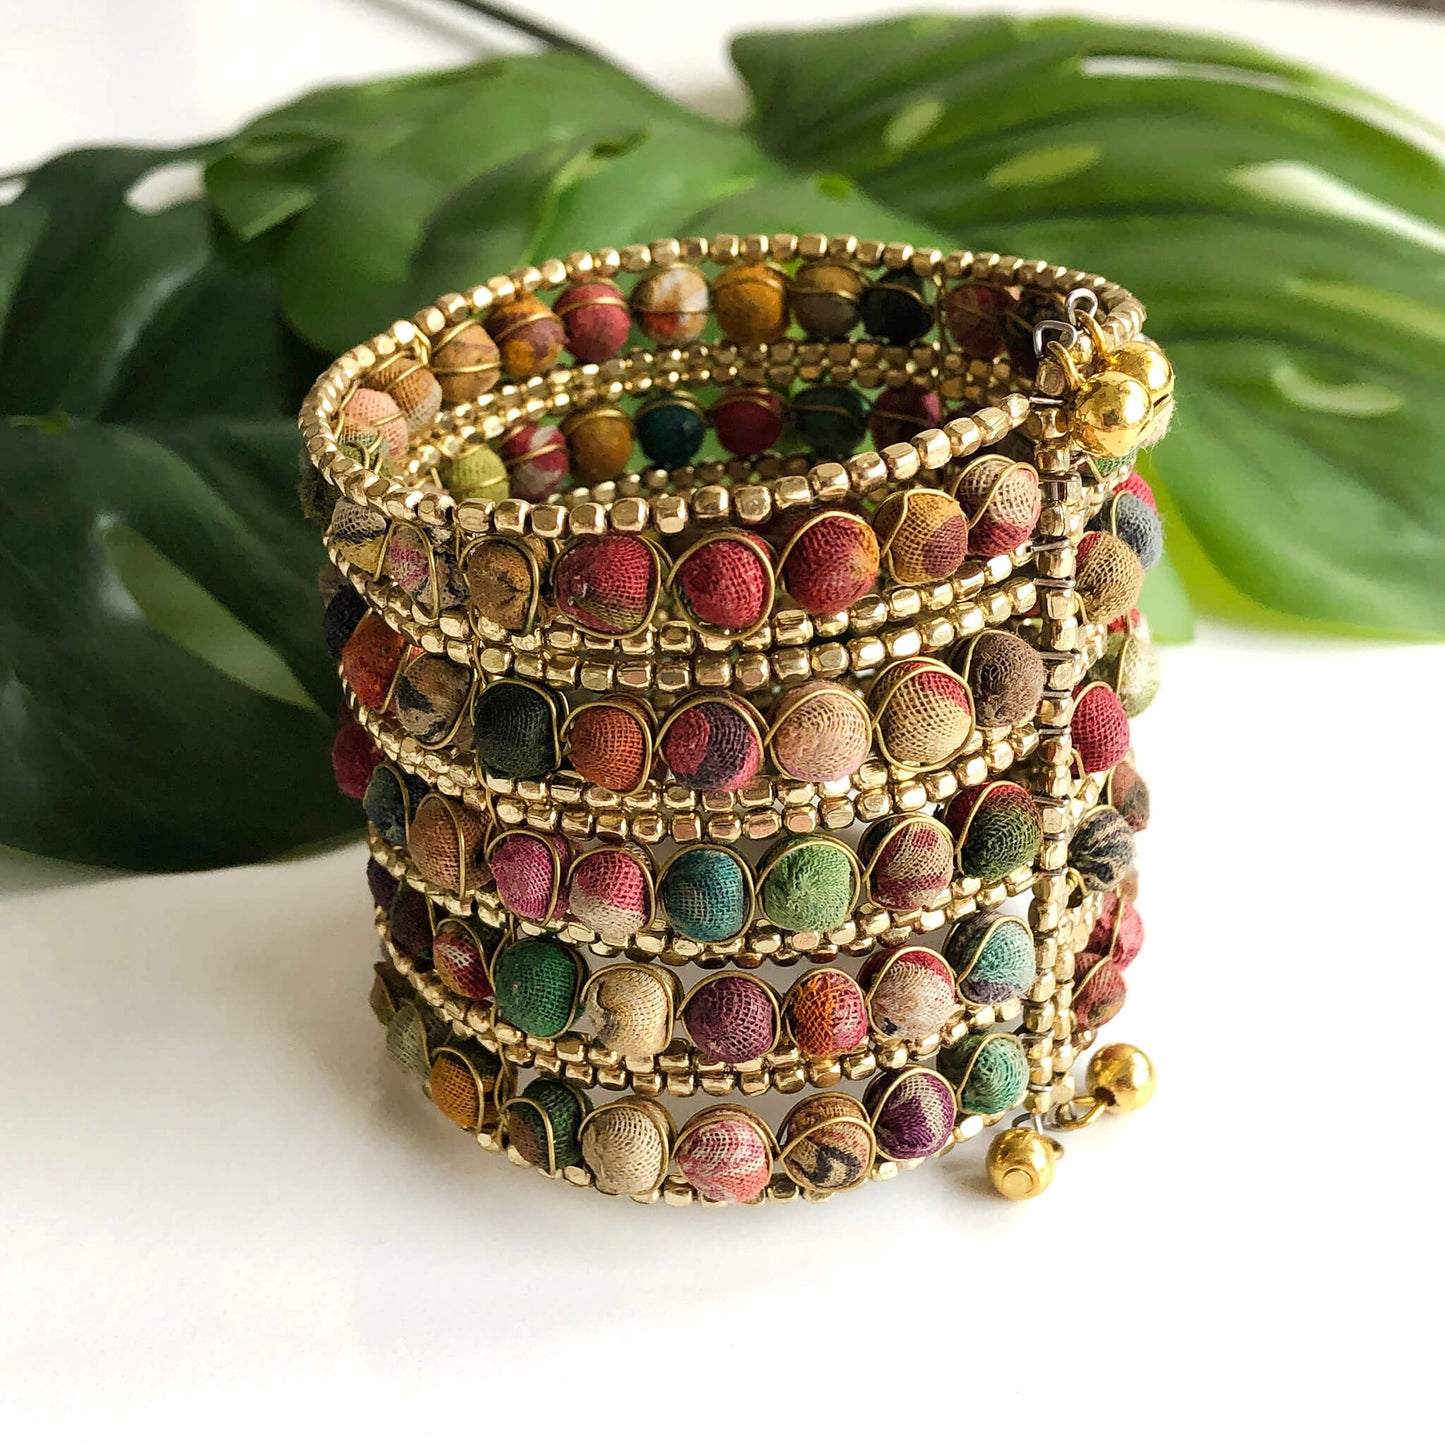 Load image into Gallery viewer, A large cuff bracelet made from many small textile-covered beads and tiny gold beads.
